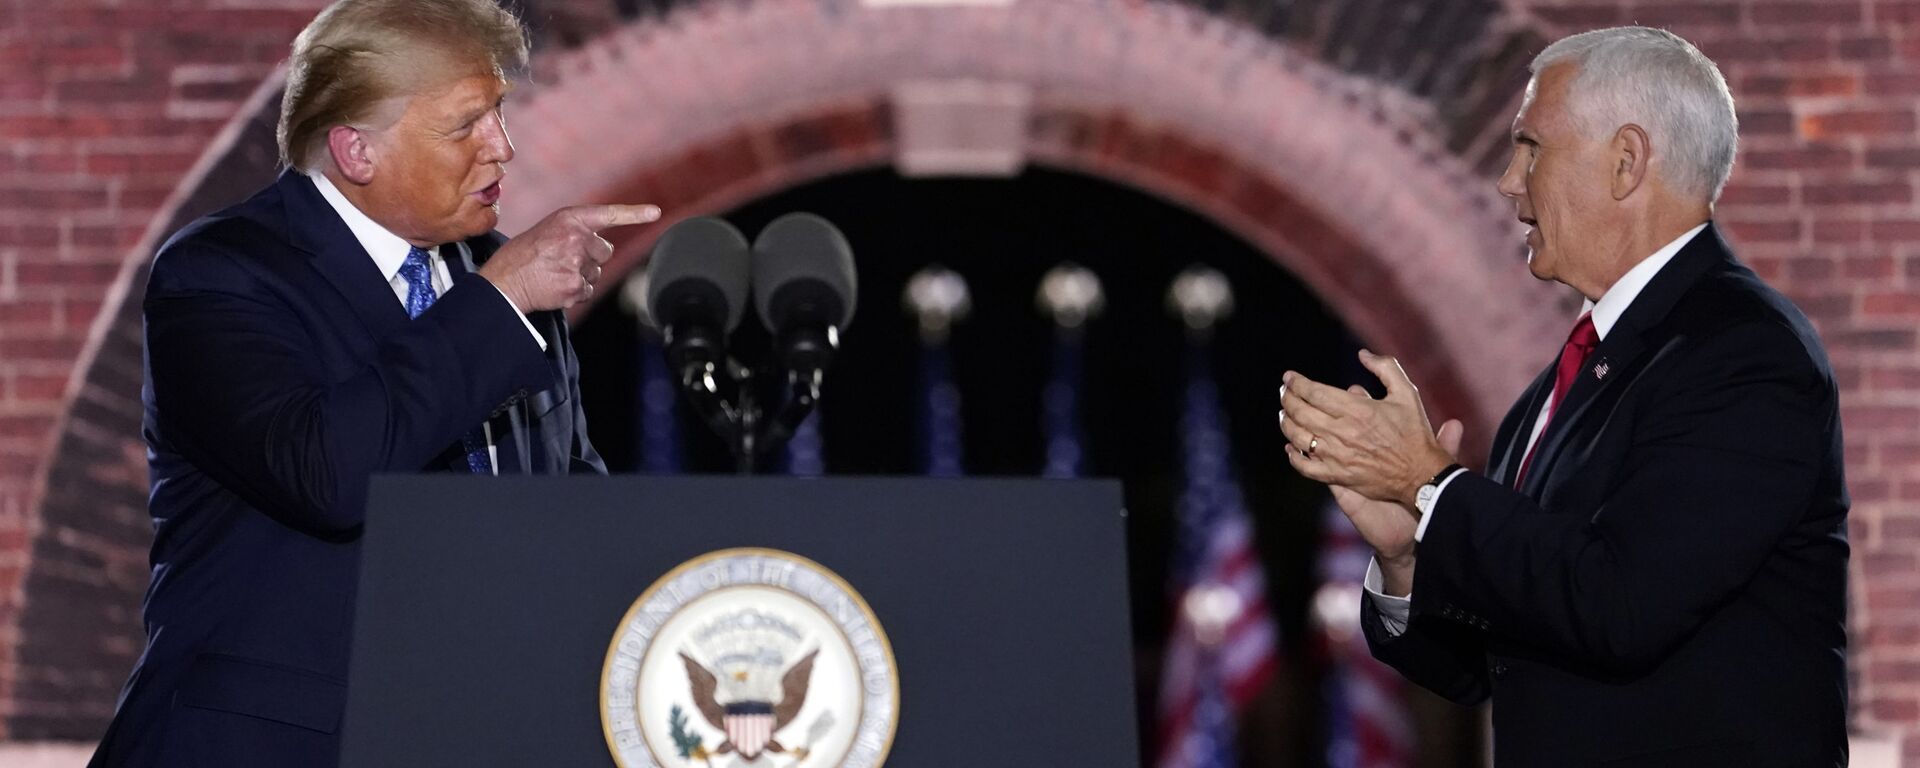 President Donald Trump joins Vice President Mike Pence on stage after Pence spoke on the third day of the Republican National Convention at Fort McHenry National Monument and Historic Shrine in Baltimore, Wednesday, Aug. 26, 2020 - Sputnik International, 1920, 07.06.2021